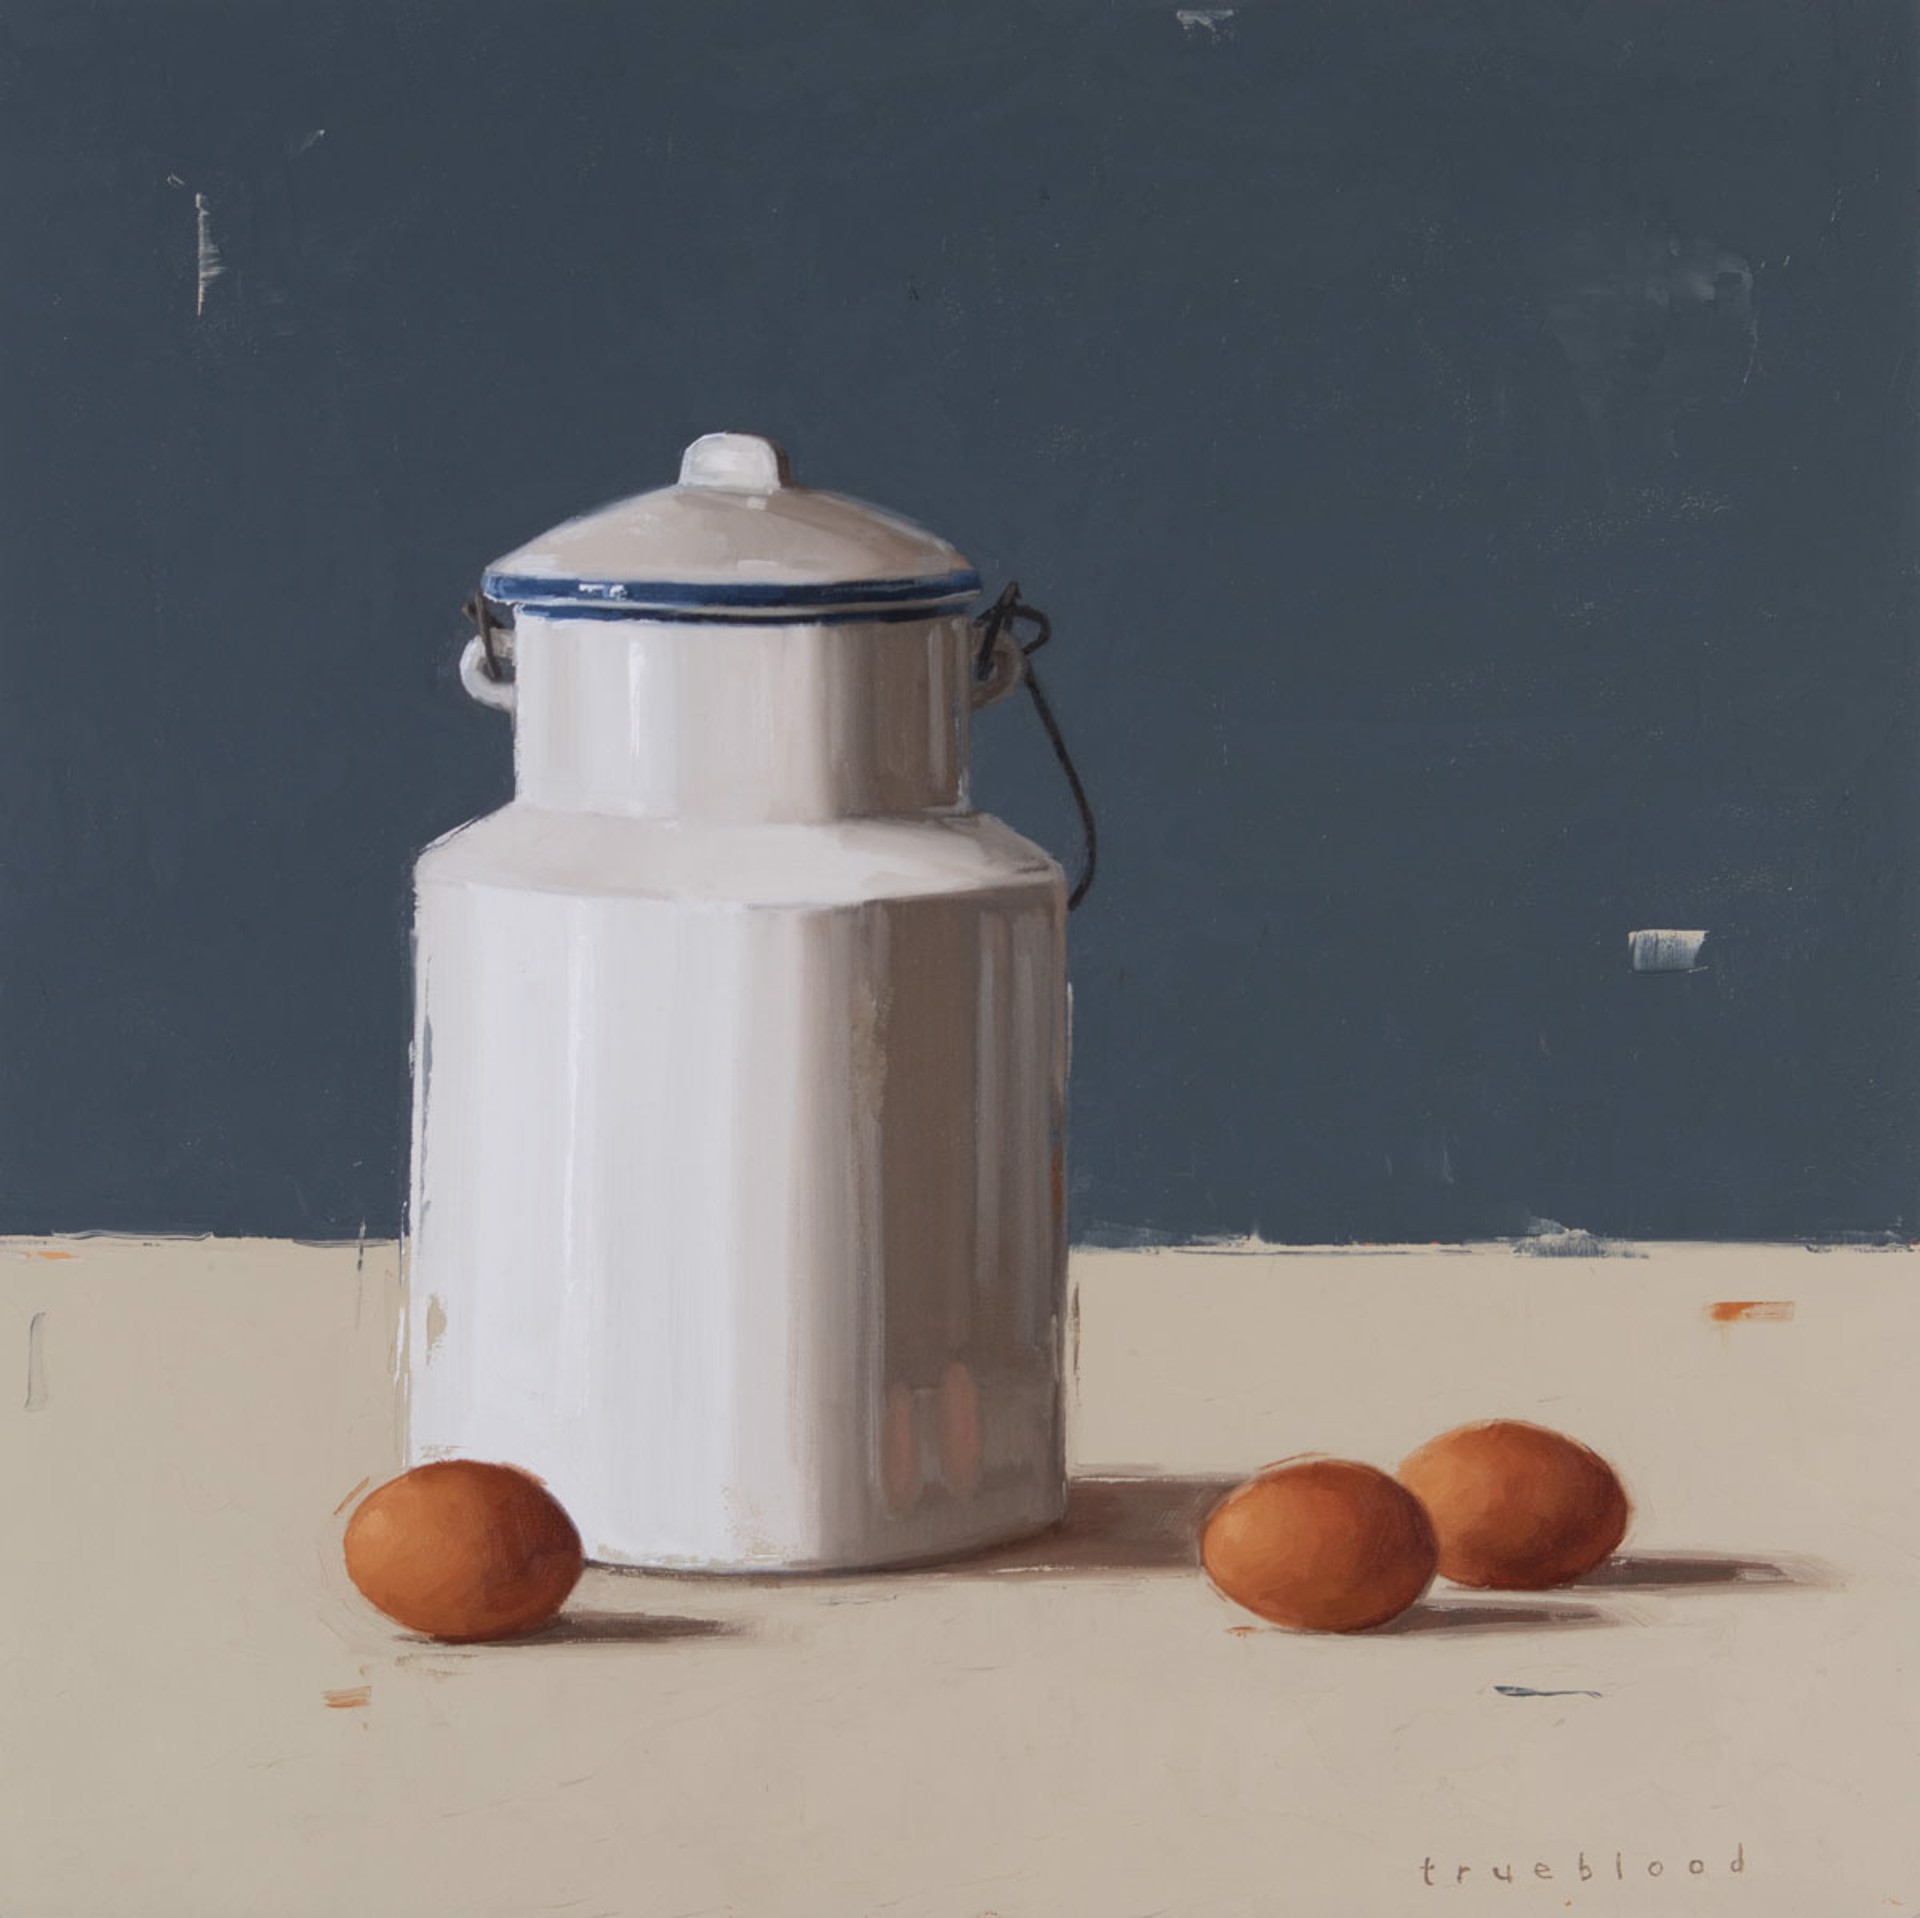 Canister with Eggs by Megan Trueblood